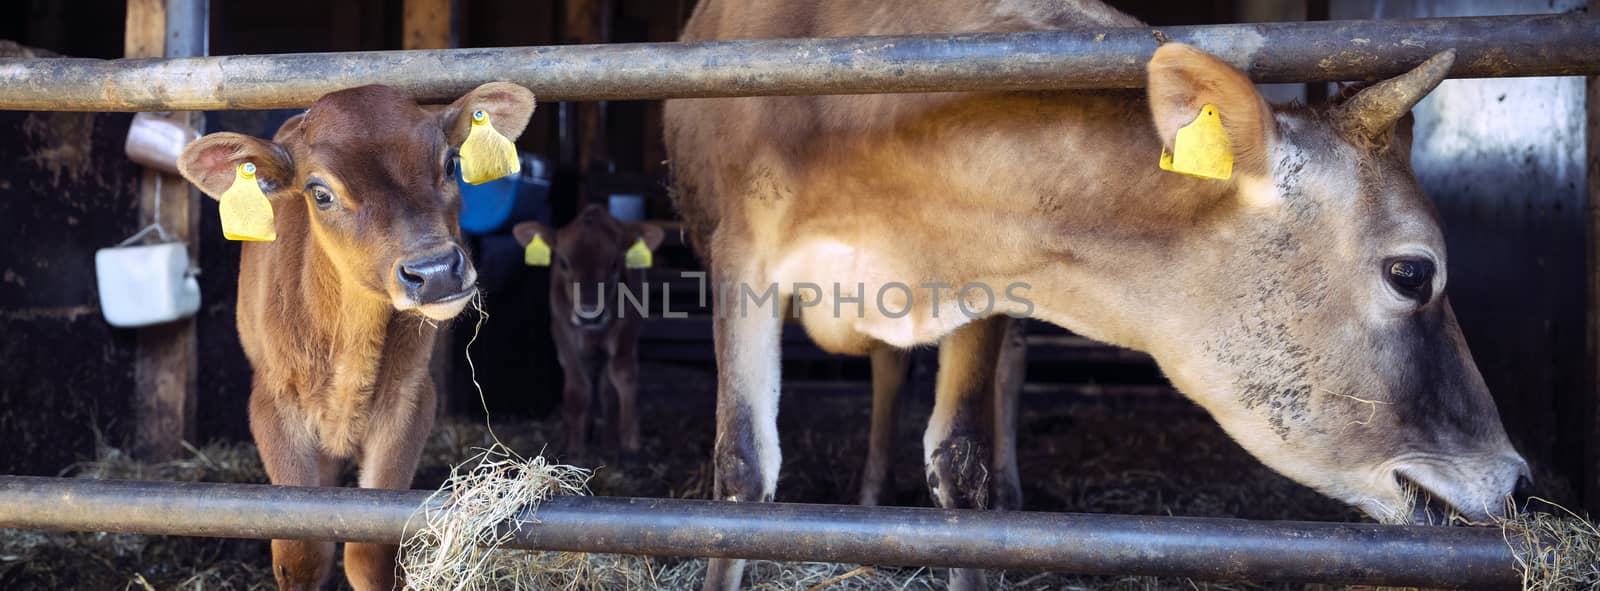 jersey cow and calves in open stable on dutch organic farm in the netherlands